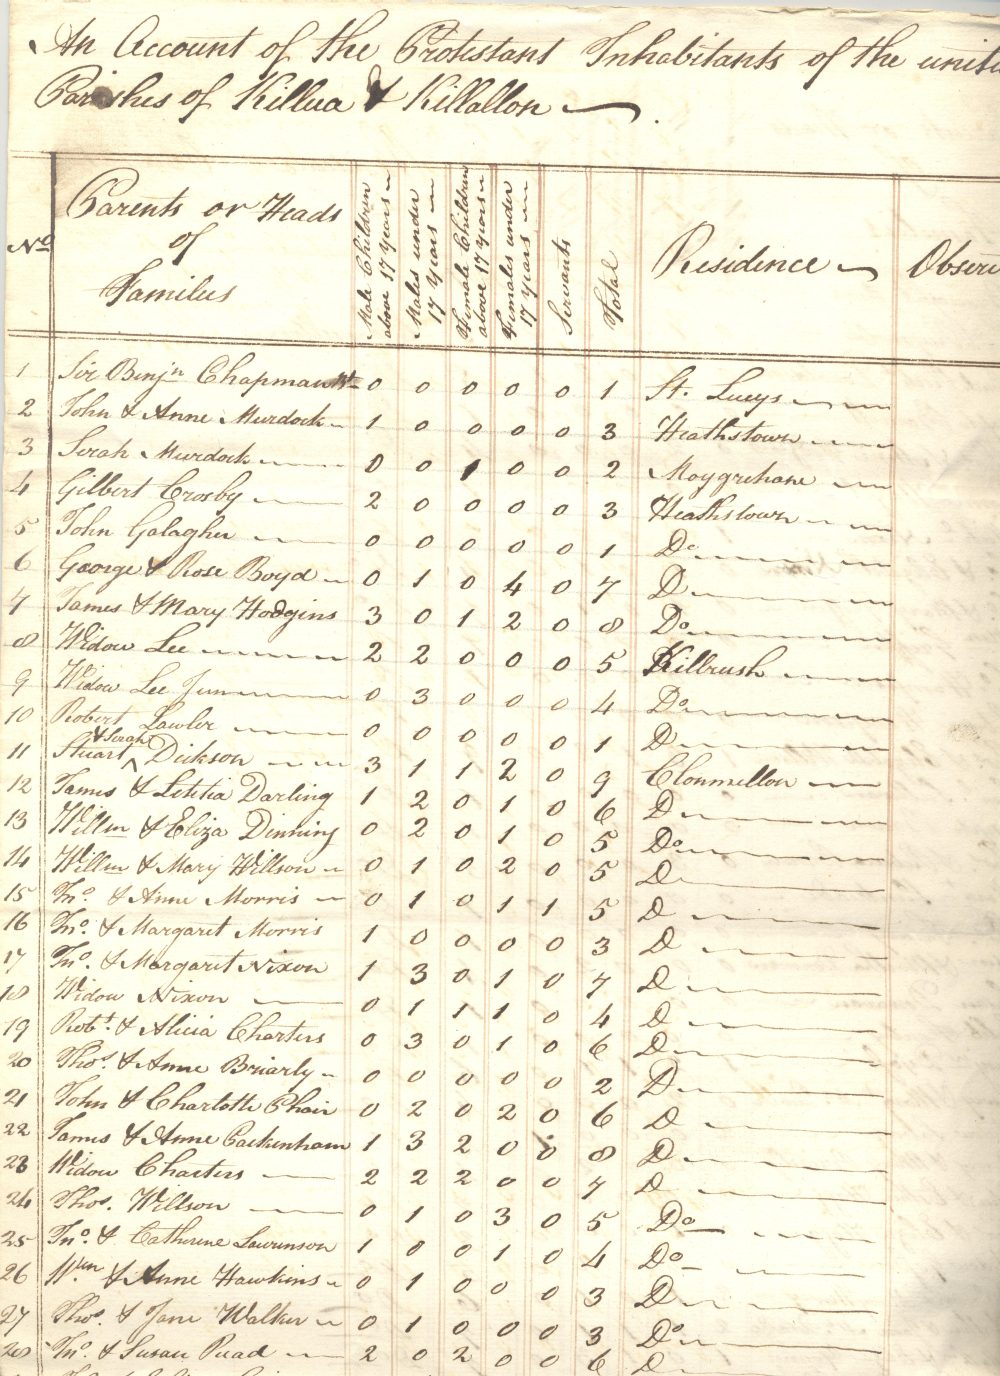 Returns of protestants in the parishes of Killua and Killallon, giving numbers in family, residence etc 1803, arranged by parish. Ordered by Bishop Thomas Lewis O'Beirne, bishop of Meath 1798-1823,  RCB Library D7/12/2/2